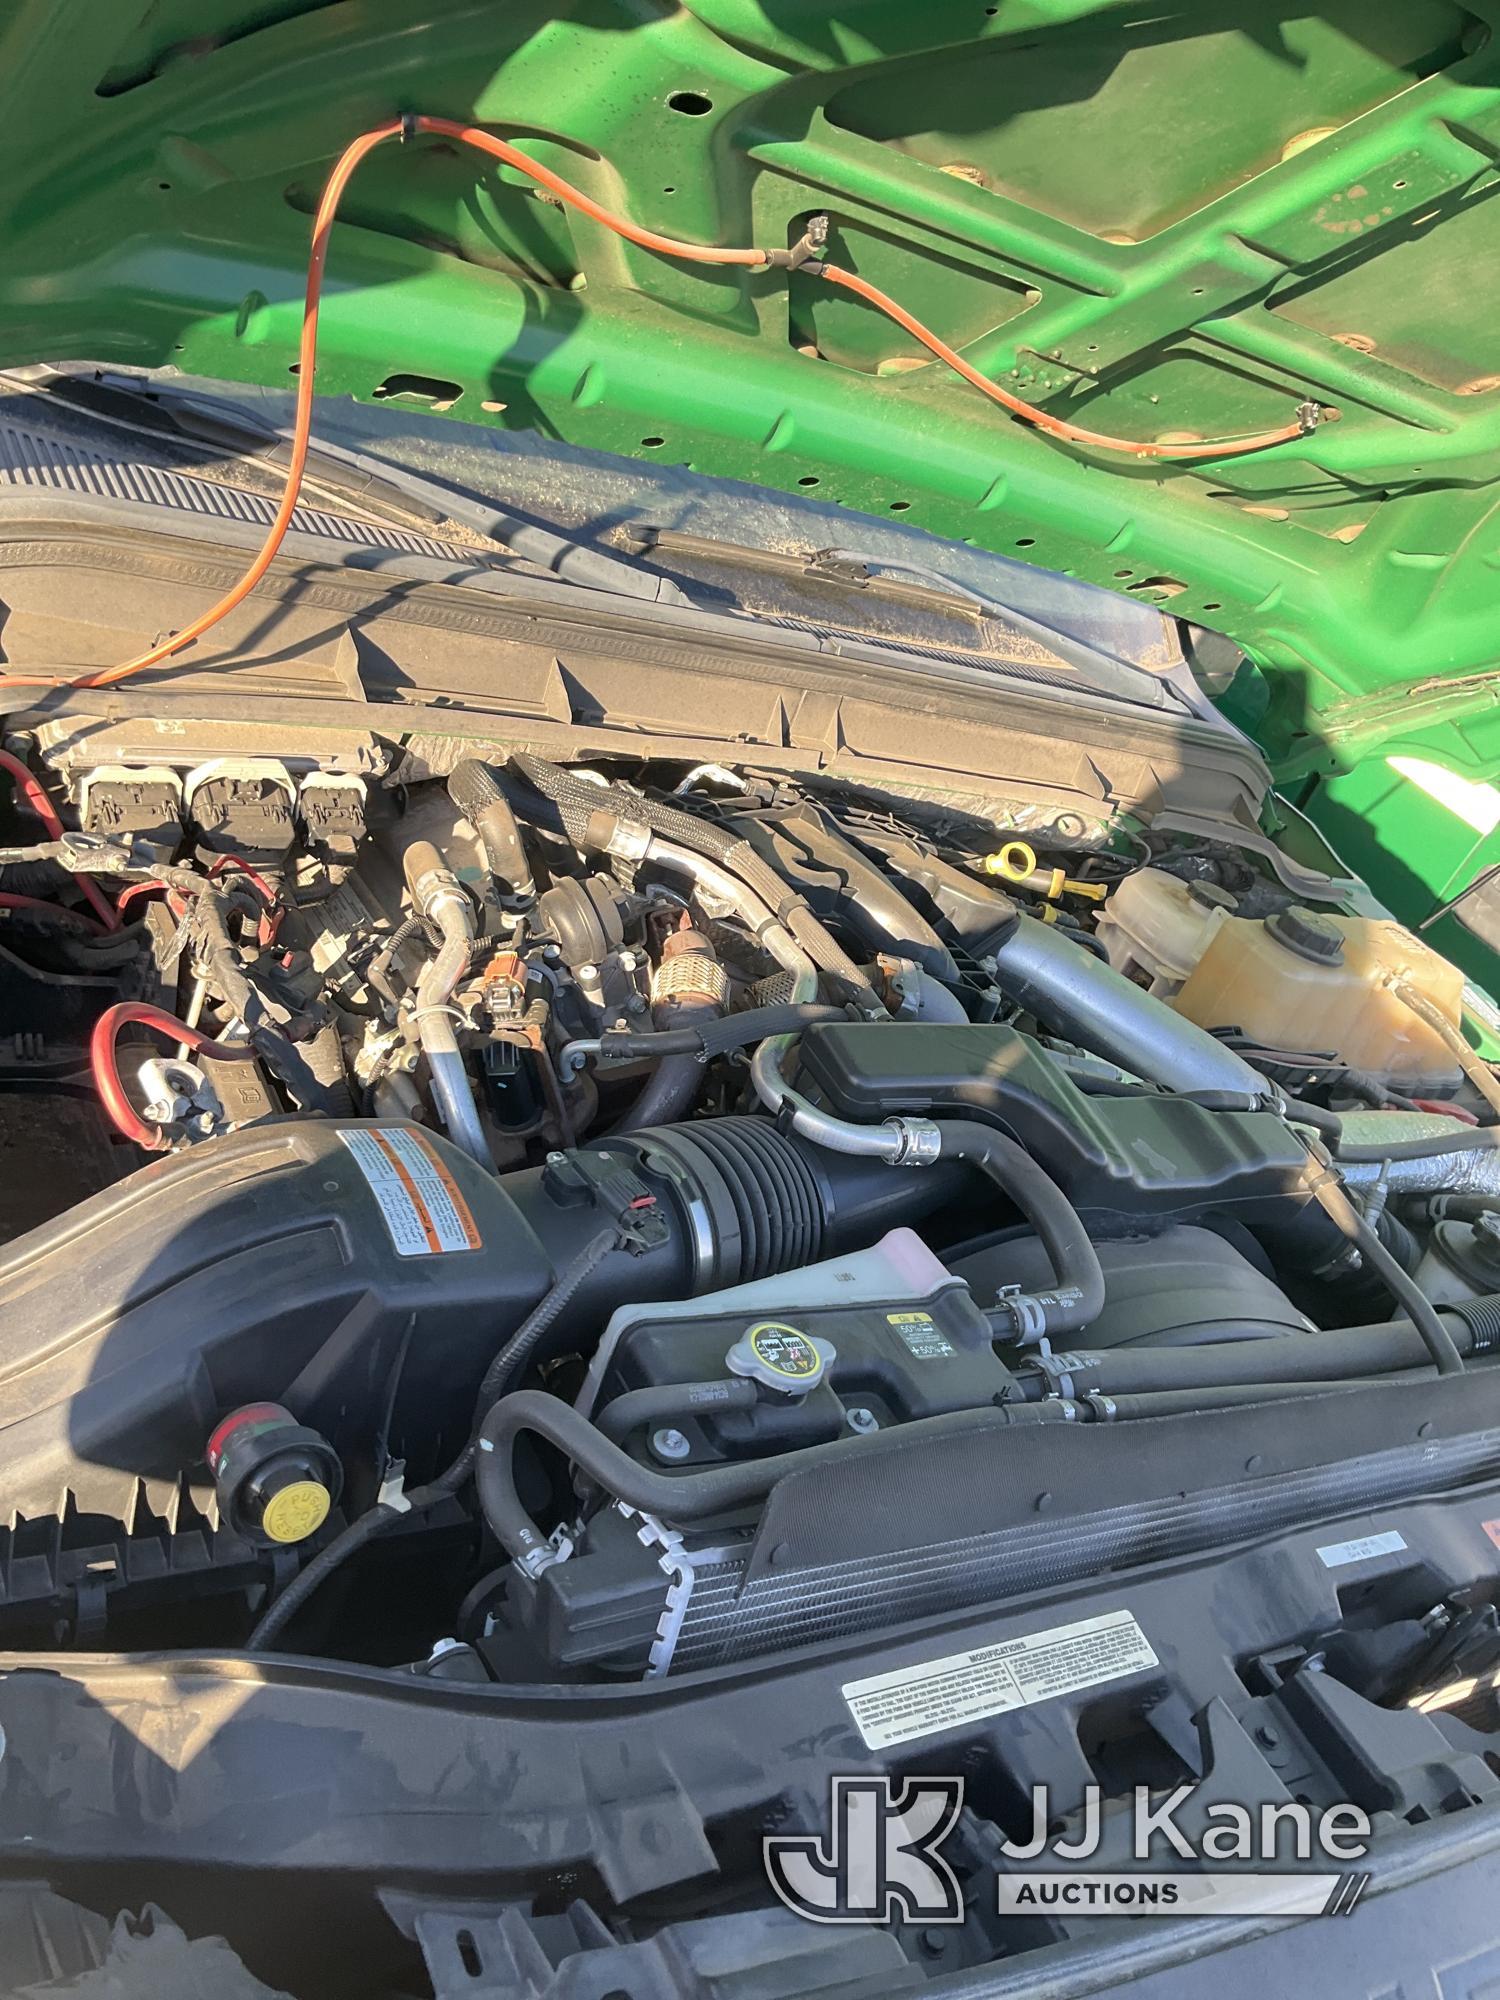 (Keenesburg, CO) 2012 Ford F550 Spray Truck Not Running, Condition Unknown, No Batteries